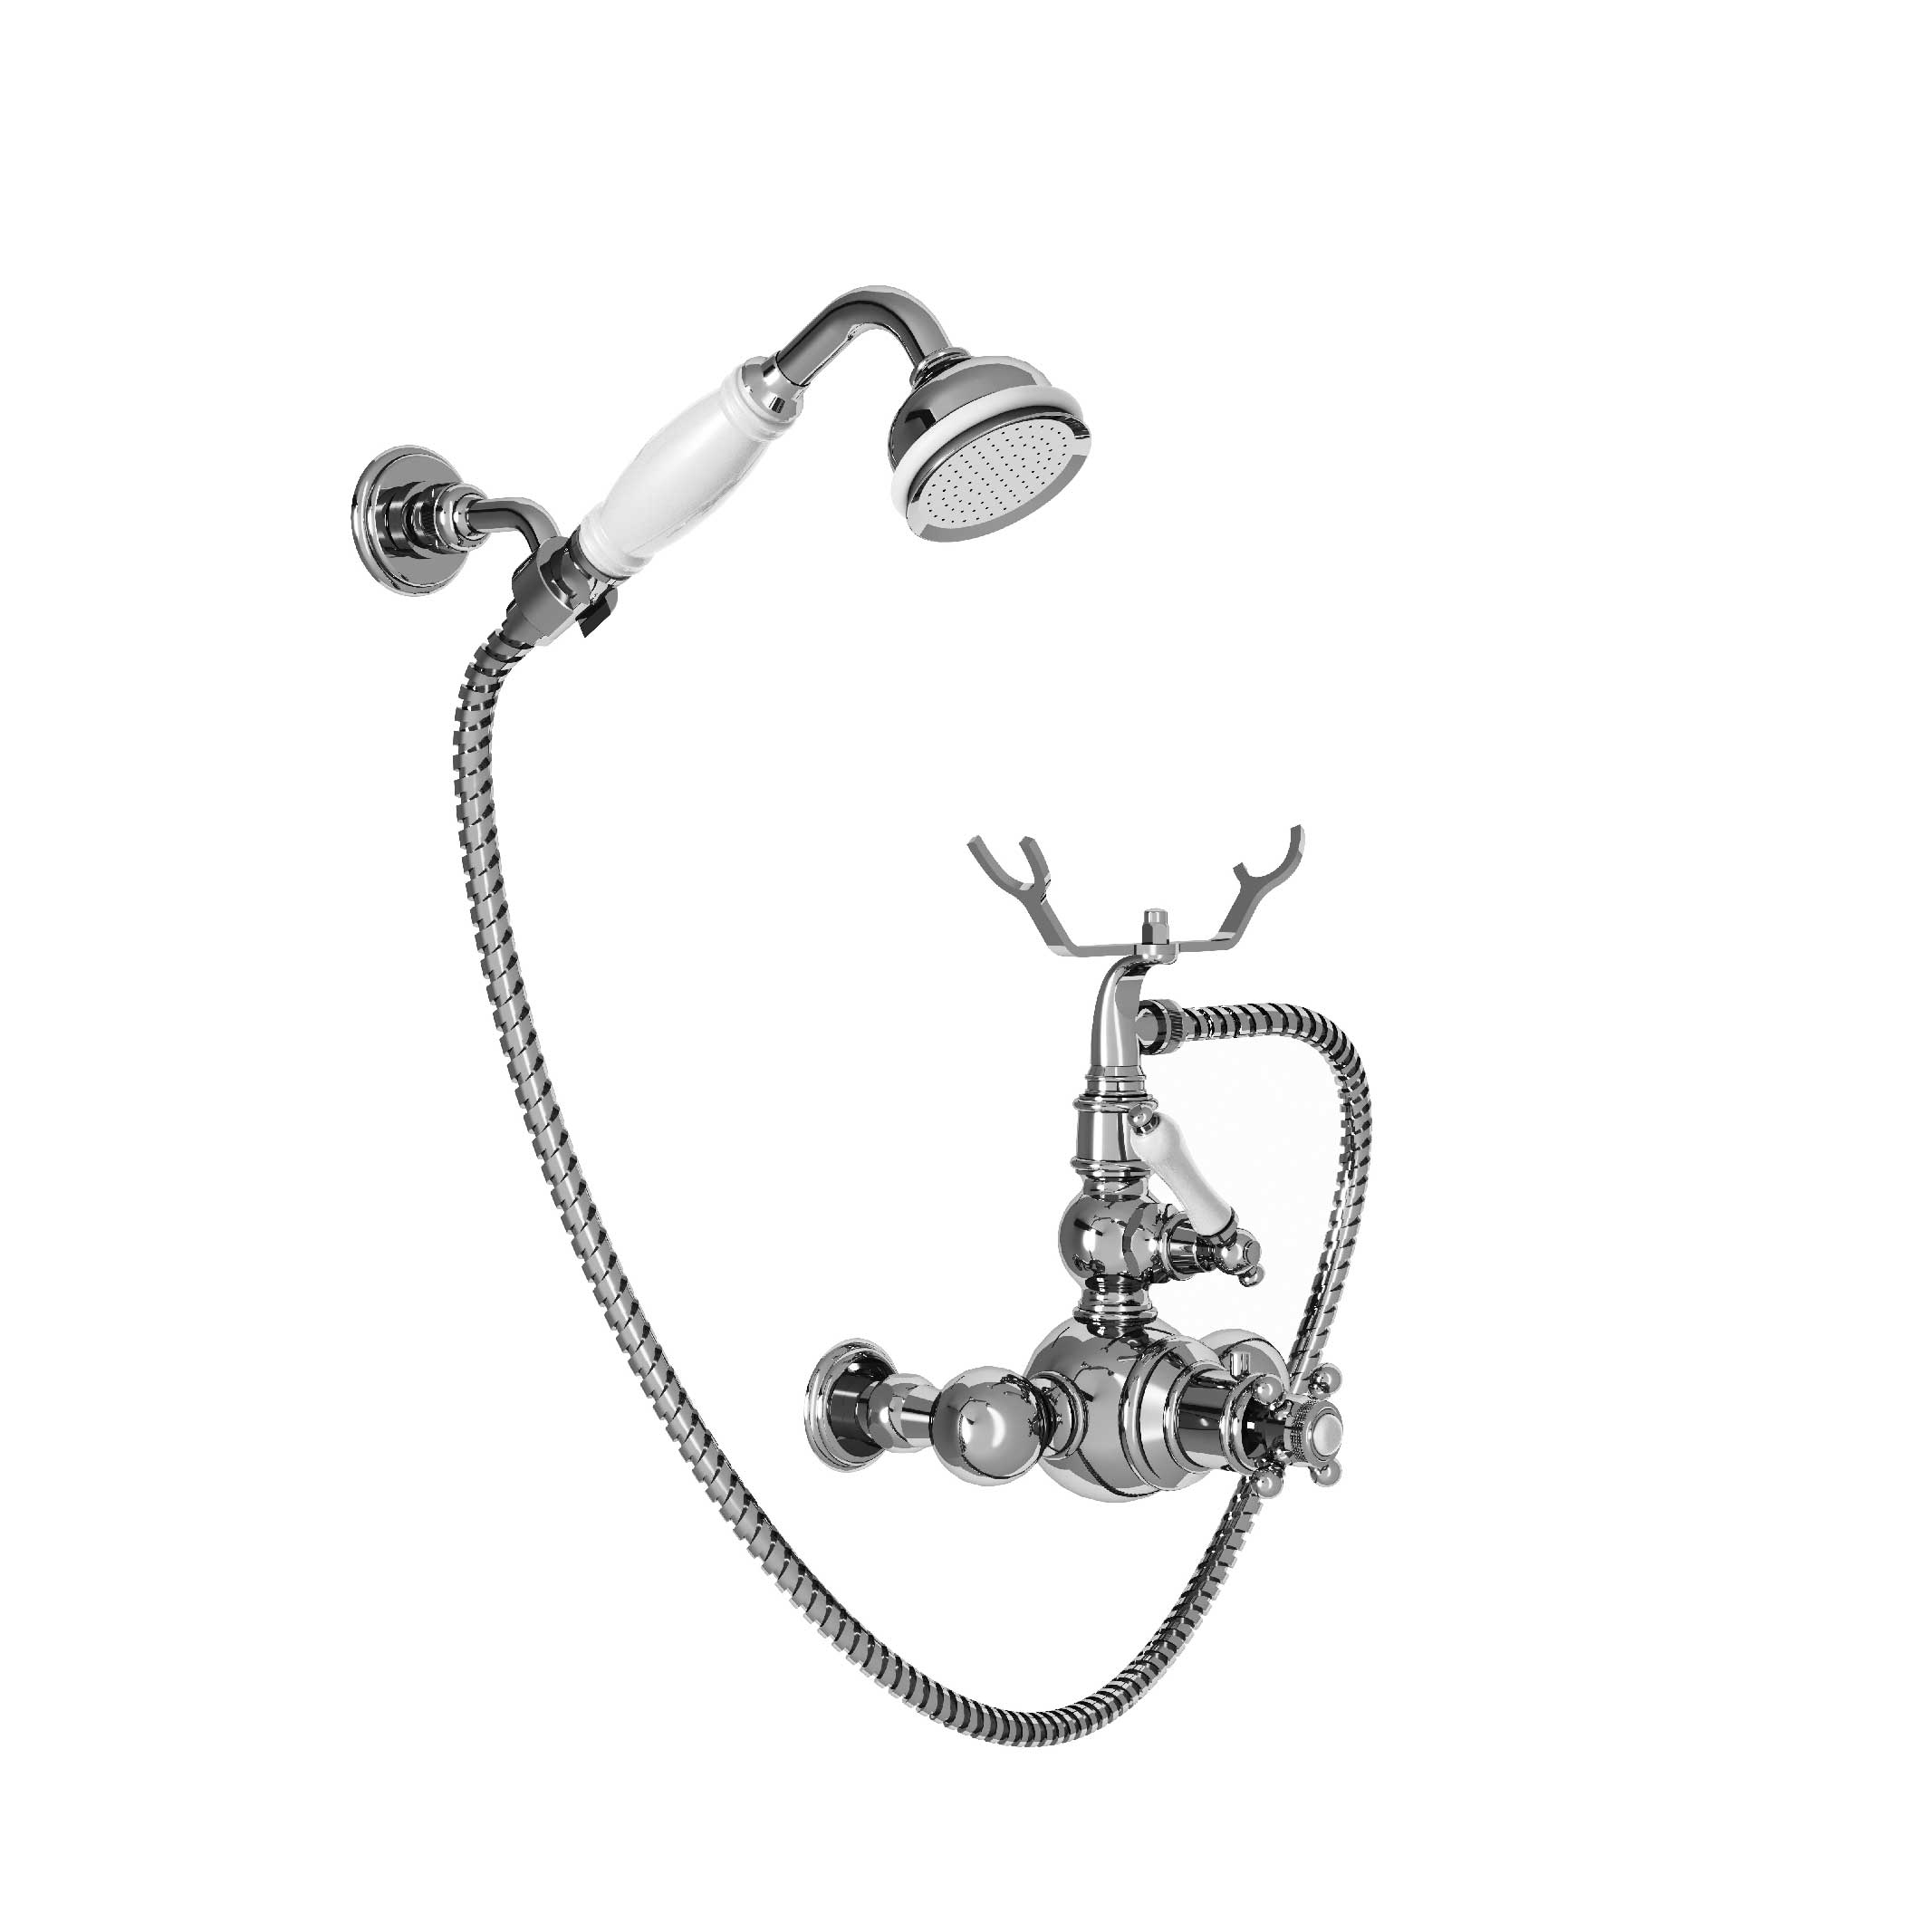 M32-2201T Thermostatic shower mixer with hook